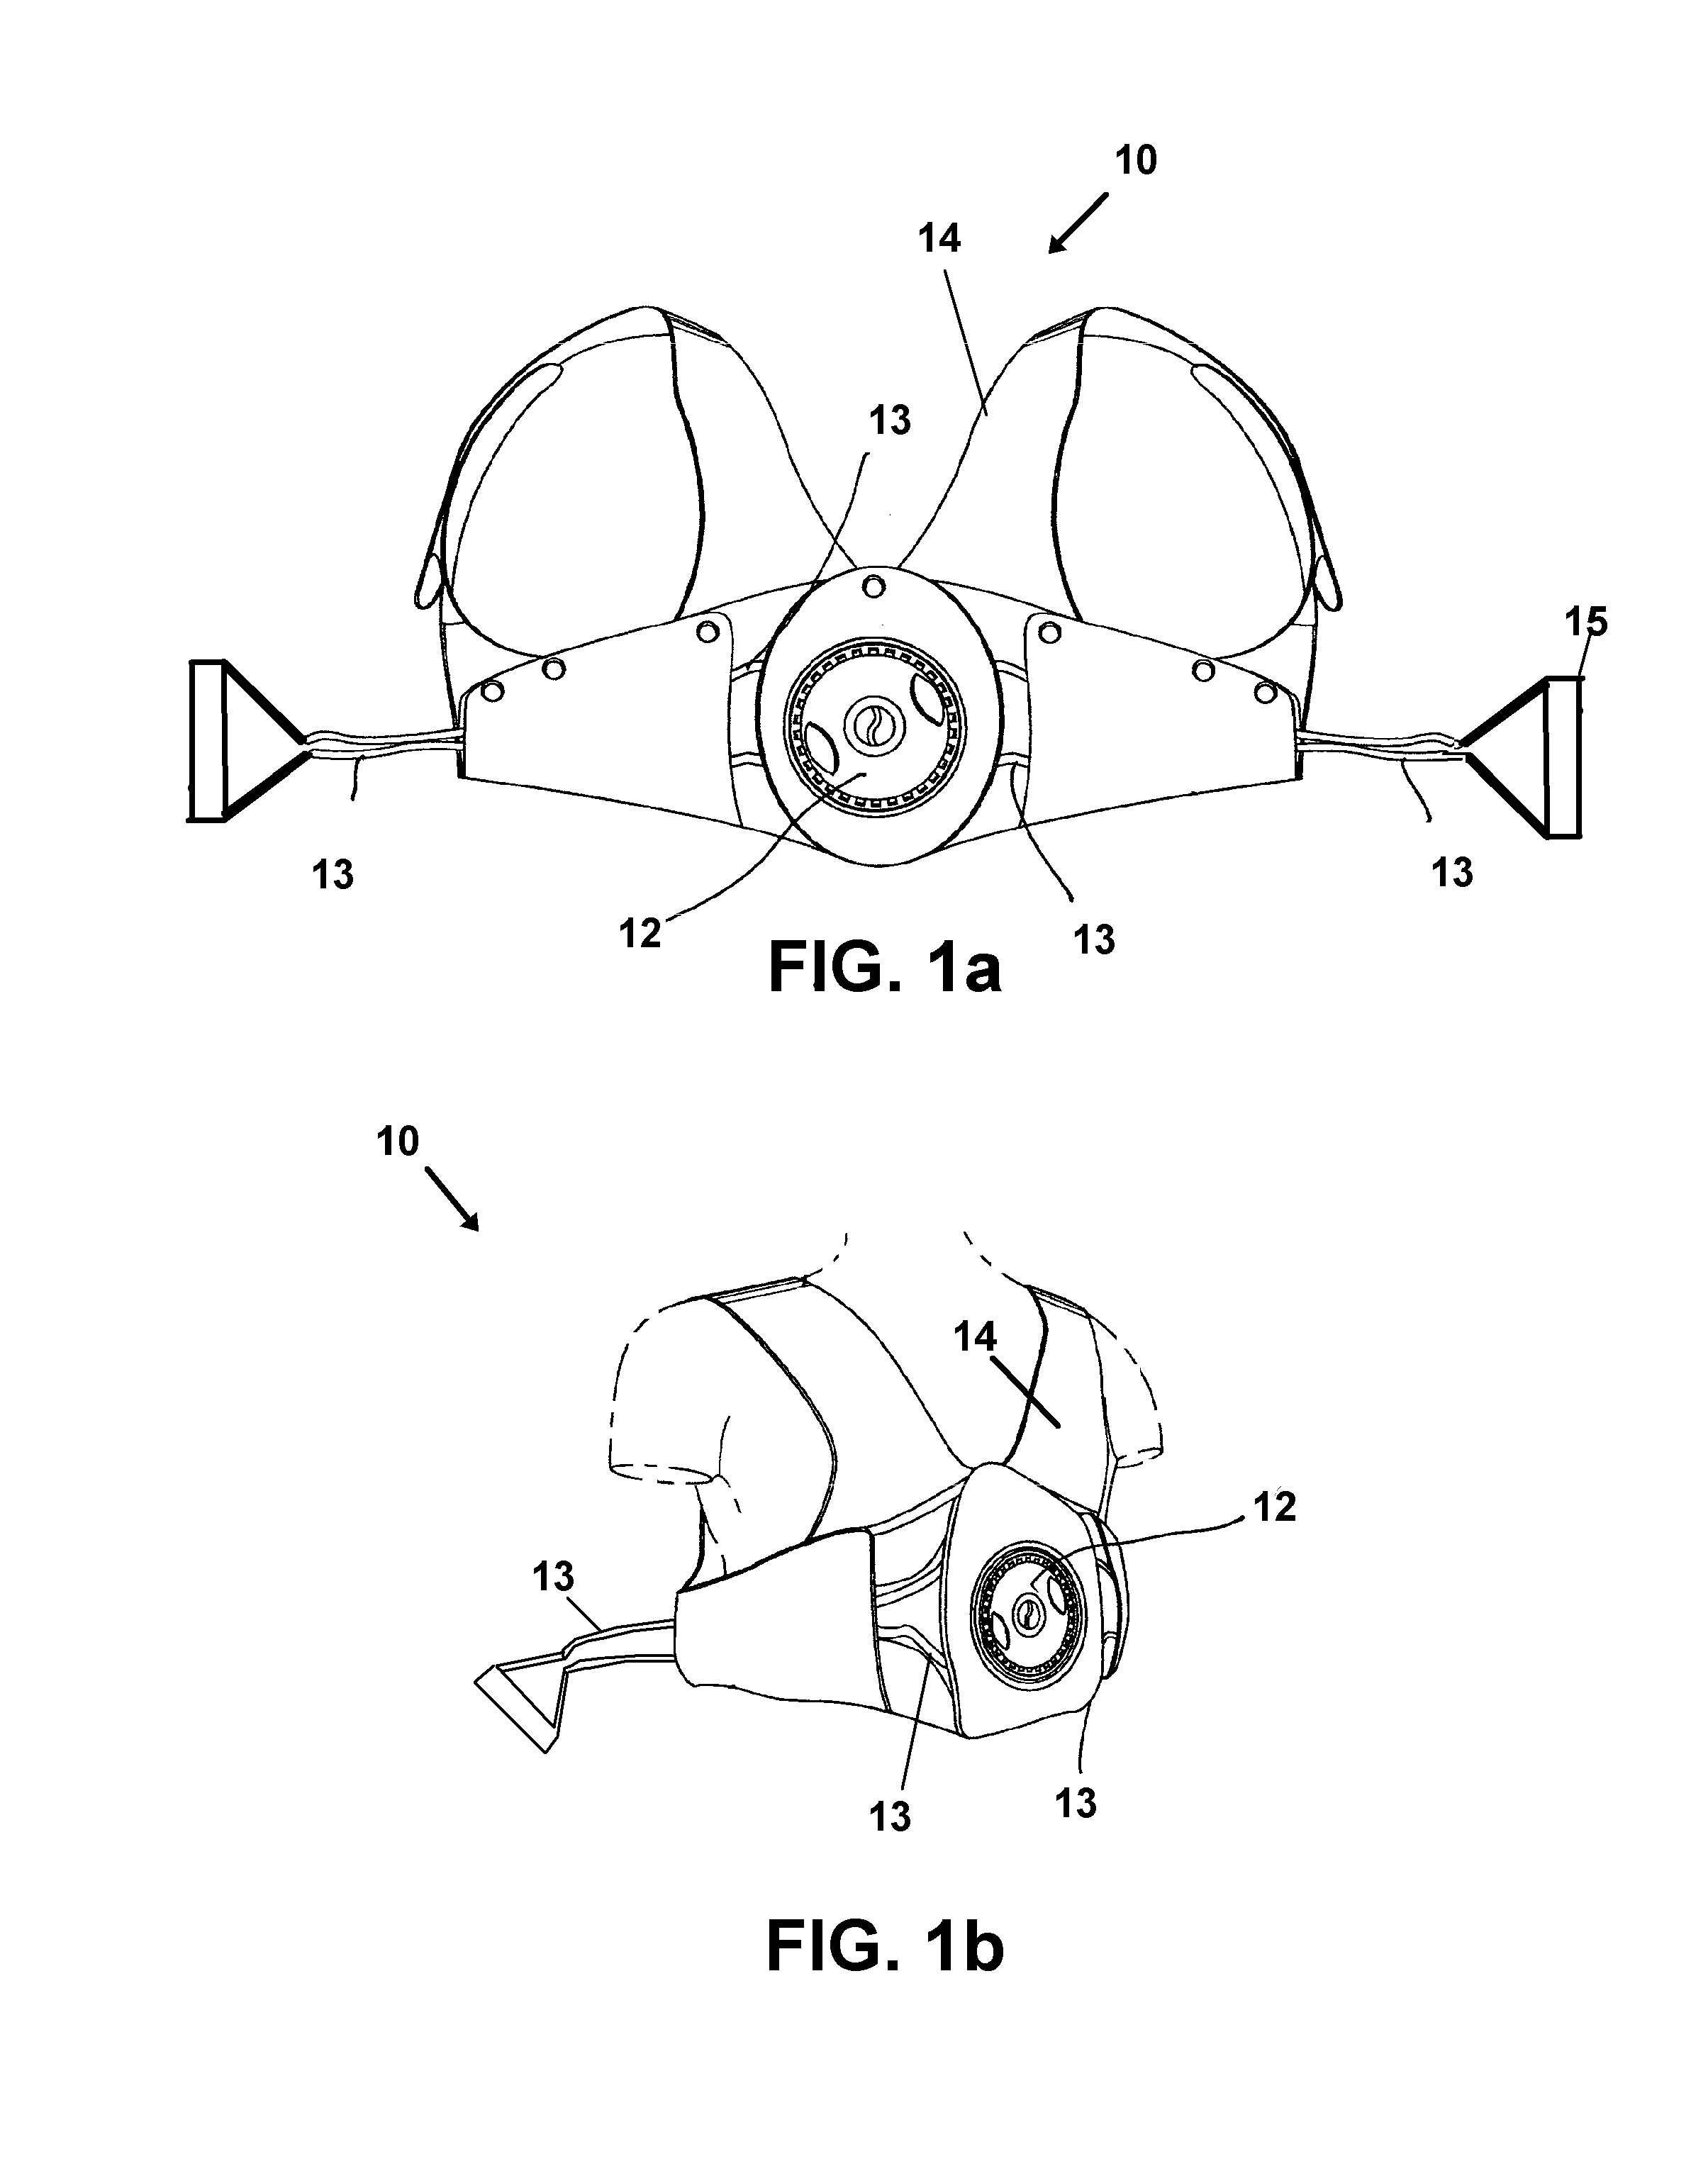 Physical work-out device with adjustable elastic bands